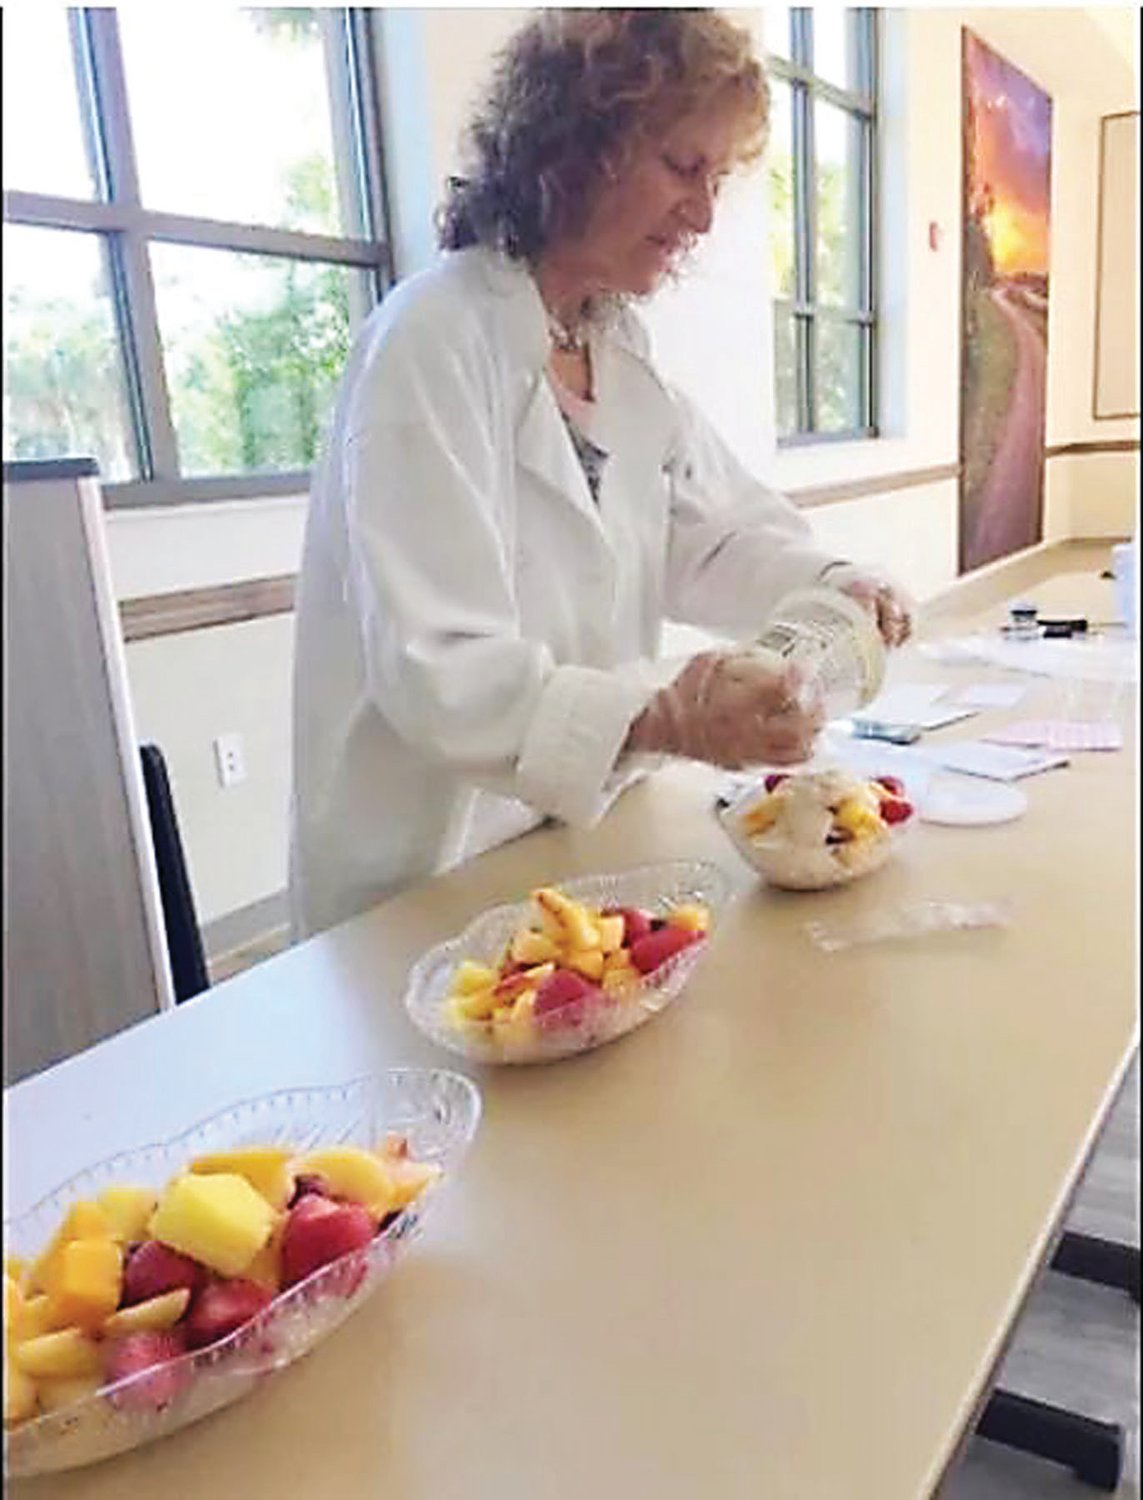 Susan Cohen prepares food as part of her cooking instruction business.